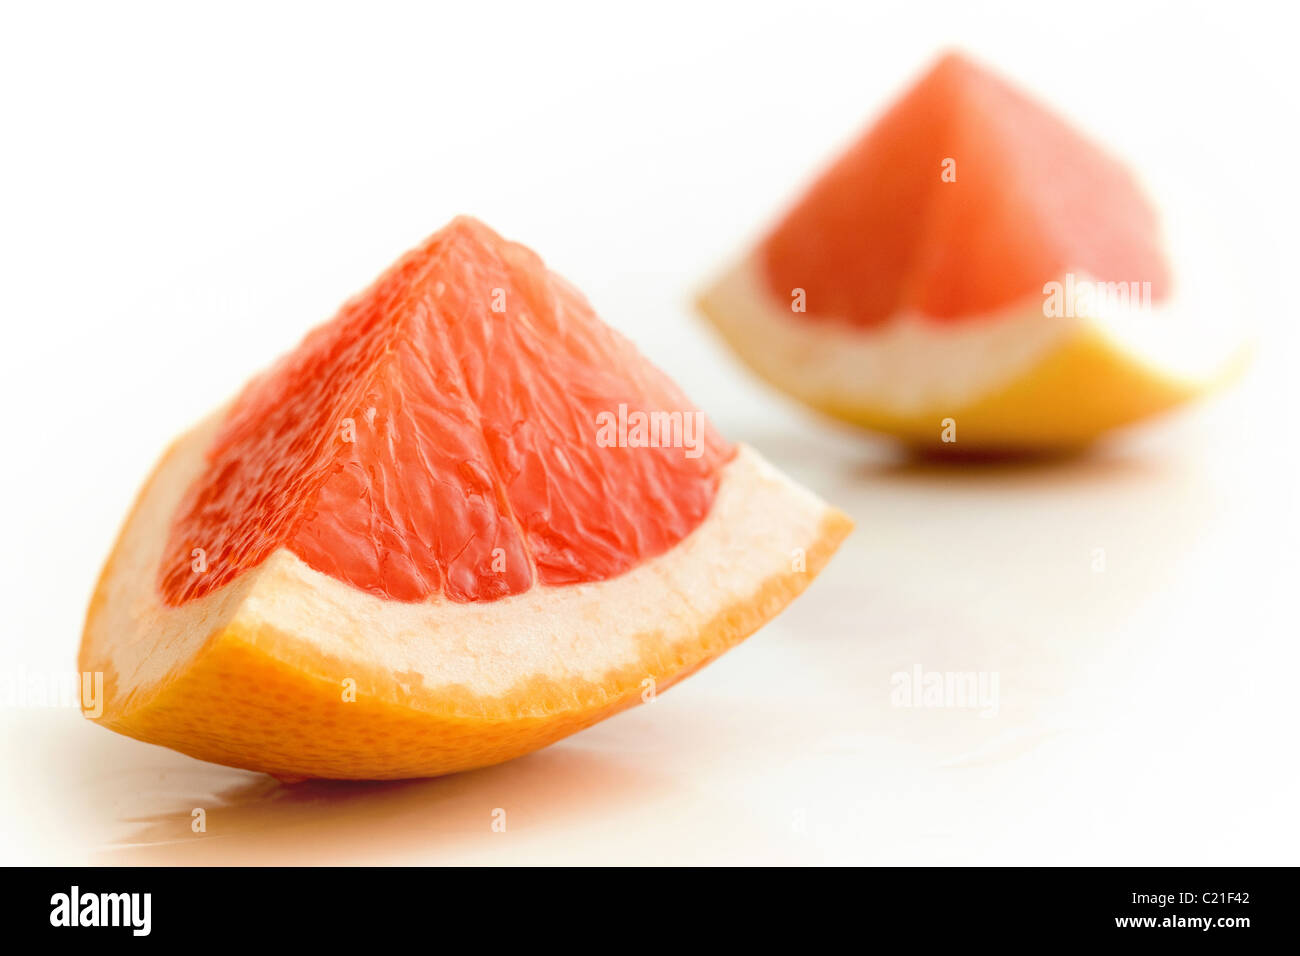 Fresh delicious pieces of grapefruit over white background Stock Photo